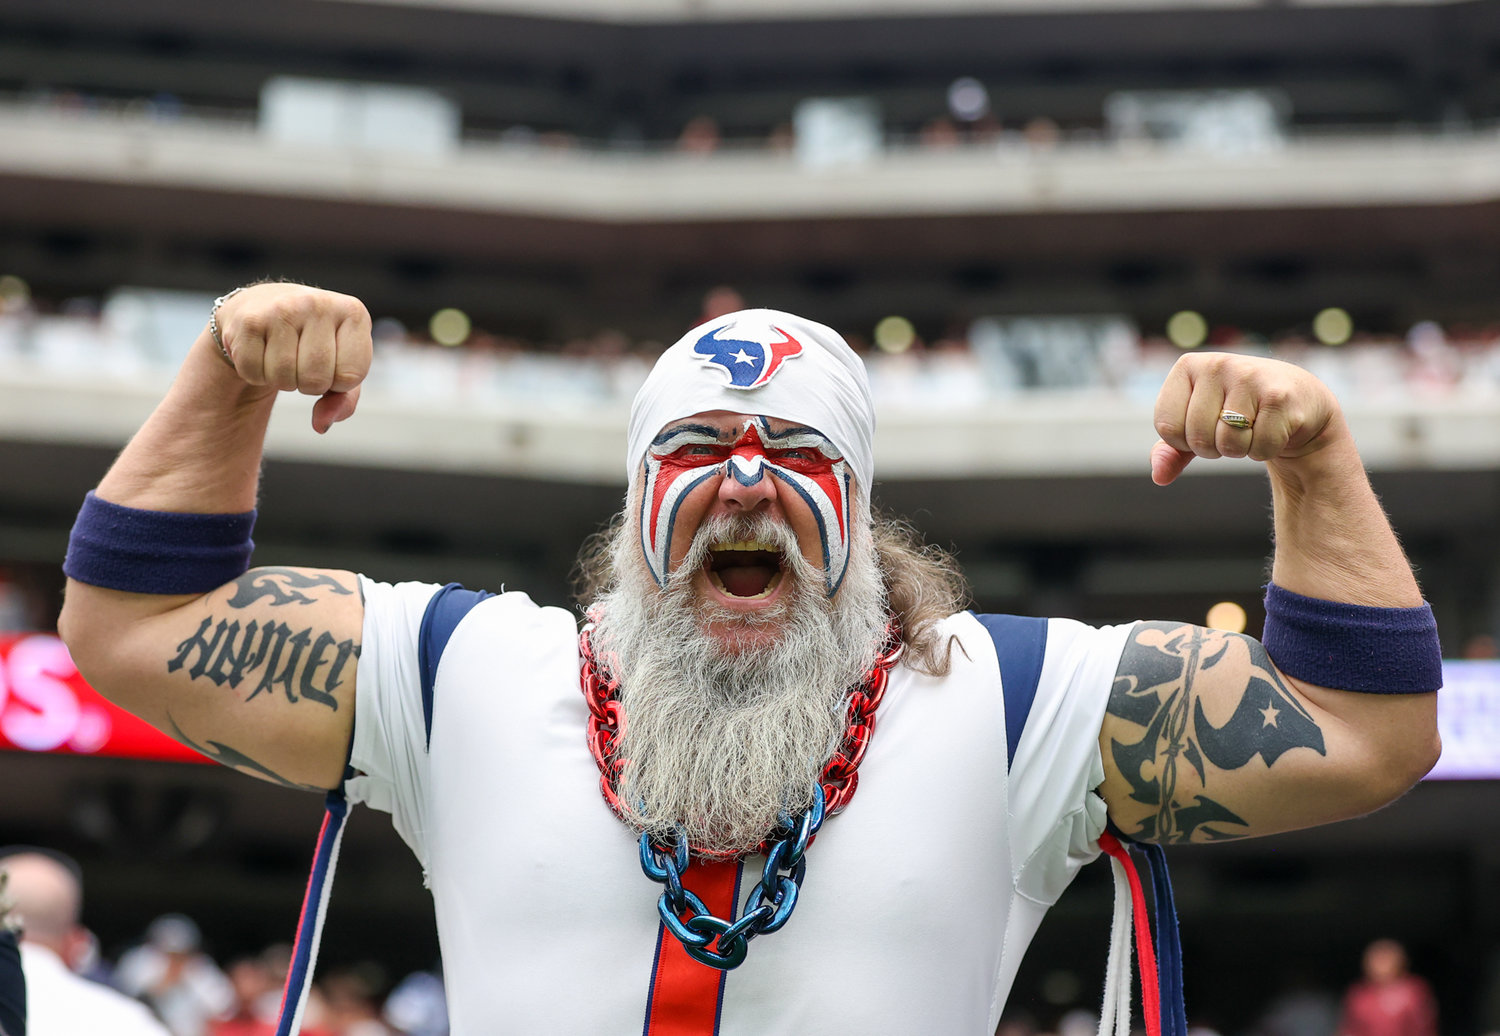 Houston Texans “Ultimate Fan” during an NFL game between the Houston Texans and the Jacksonville Jaguars on September 12, 2021 in Houston, Texas.